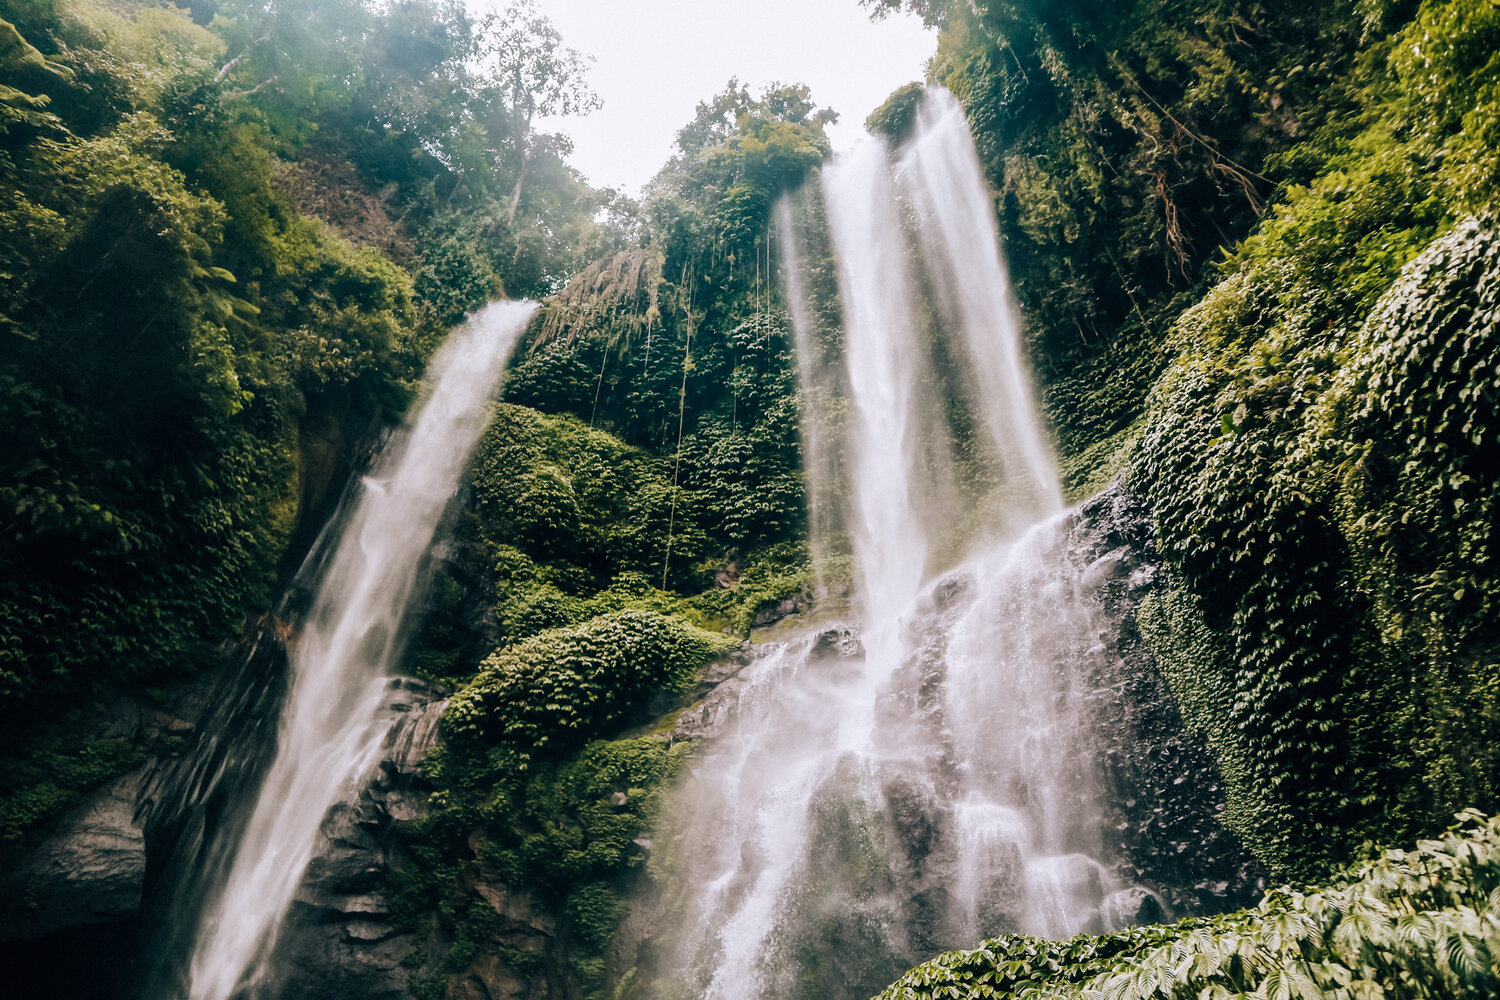 There are so many beautiful waterfalls all over Bali, many with amazing hikes through the jungle and beautiful blue waters. Sounds amazing right? These are the  waterfalls you can’t miss ! I’ve put together a list of the  top 4 waterfalls you must-see in Bali . You might even call these  the best waterfalls in Bali!  Add these to your Bali bucketlist and enjoy the adventure!